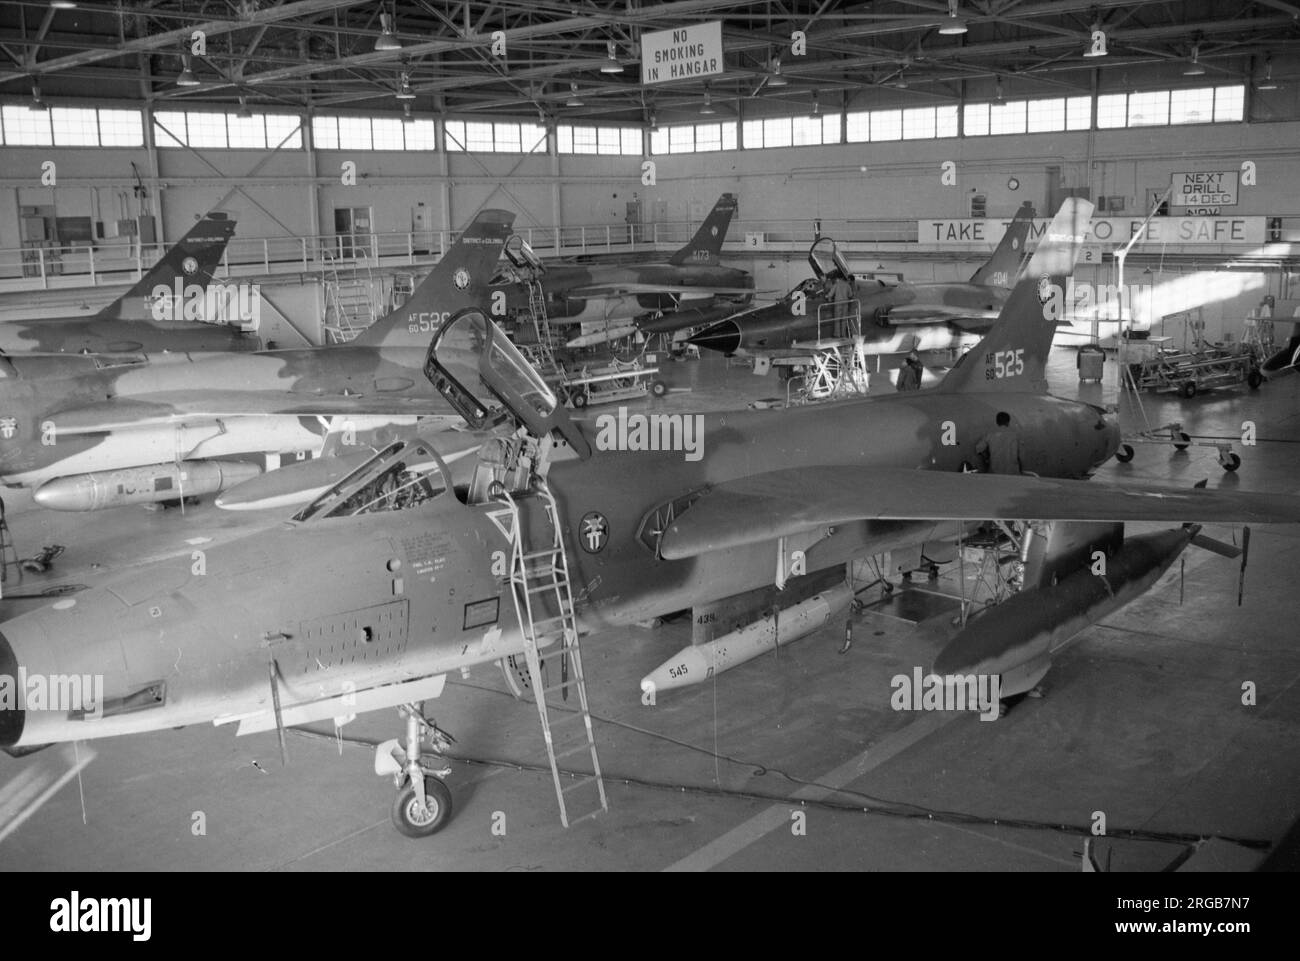 United States Air Force - Republic F-105D-10-RE Thunderchief 60-0525 (msn D213). A plethora of F-105s of District of Columbia Air National Guard in their hangar. Stock Photo